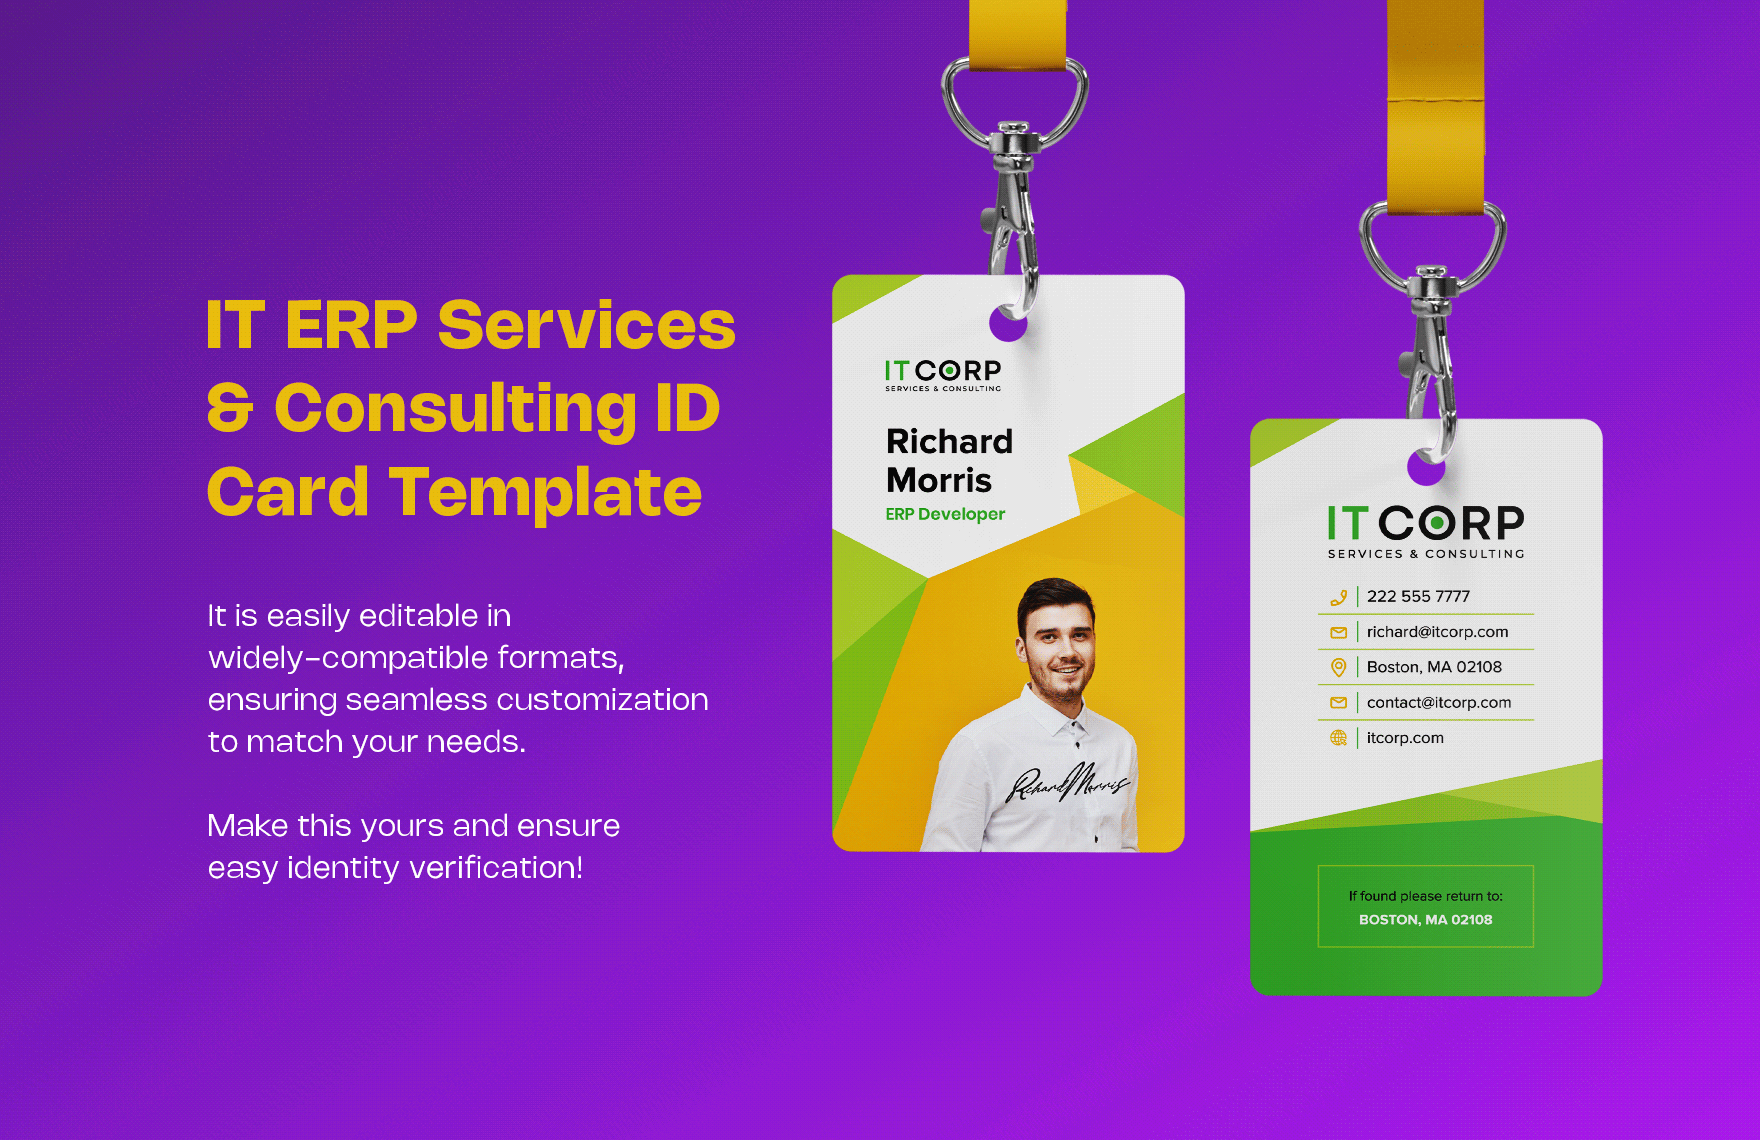 IT ERP Services & Consulting ID Card Template